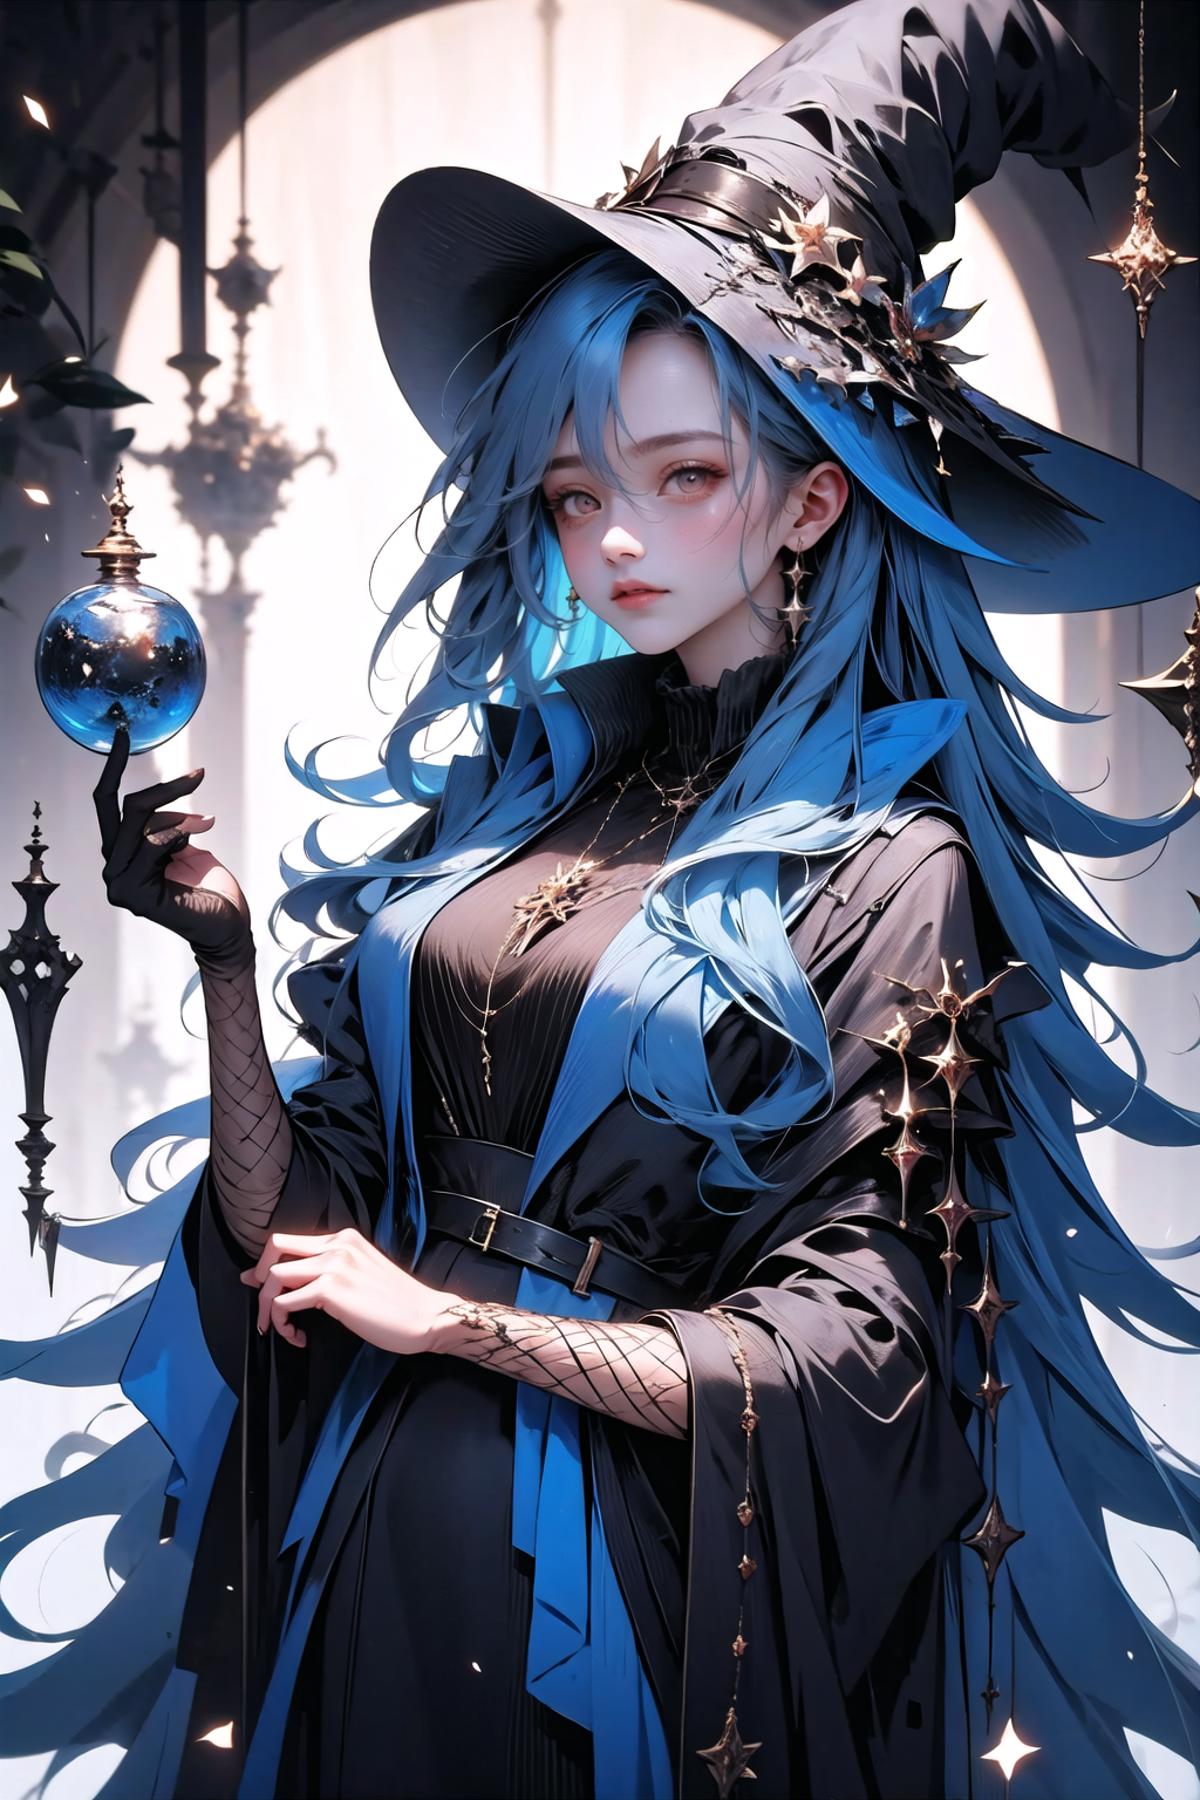 Witchiness | A Witch's Wardrobe image by wrench1815